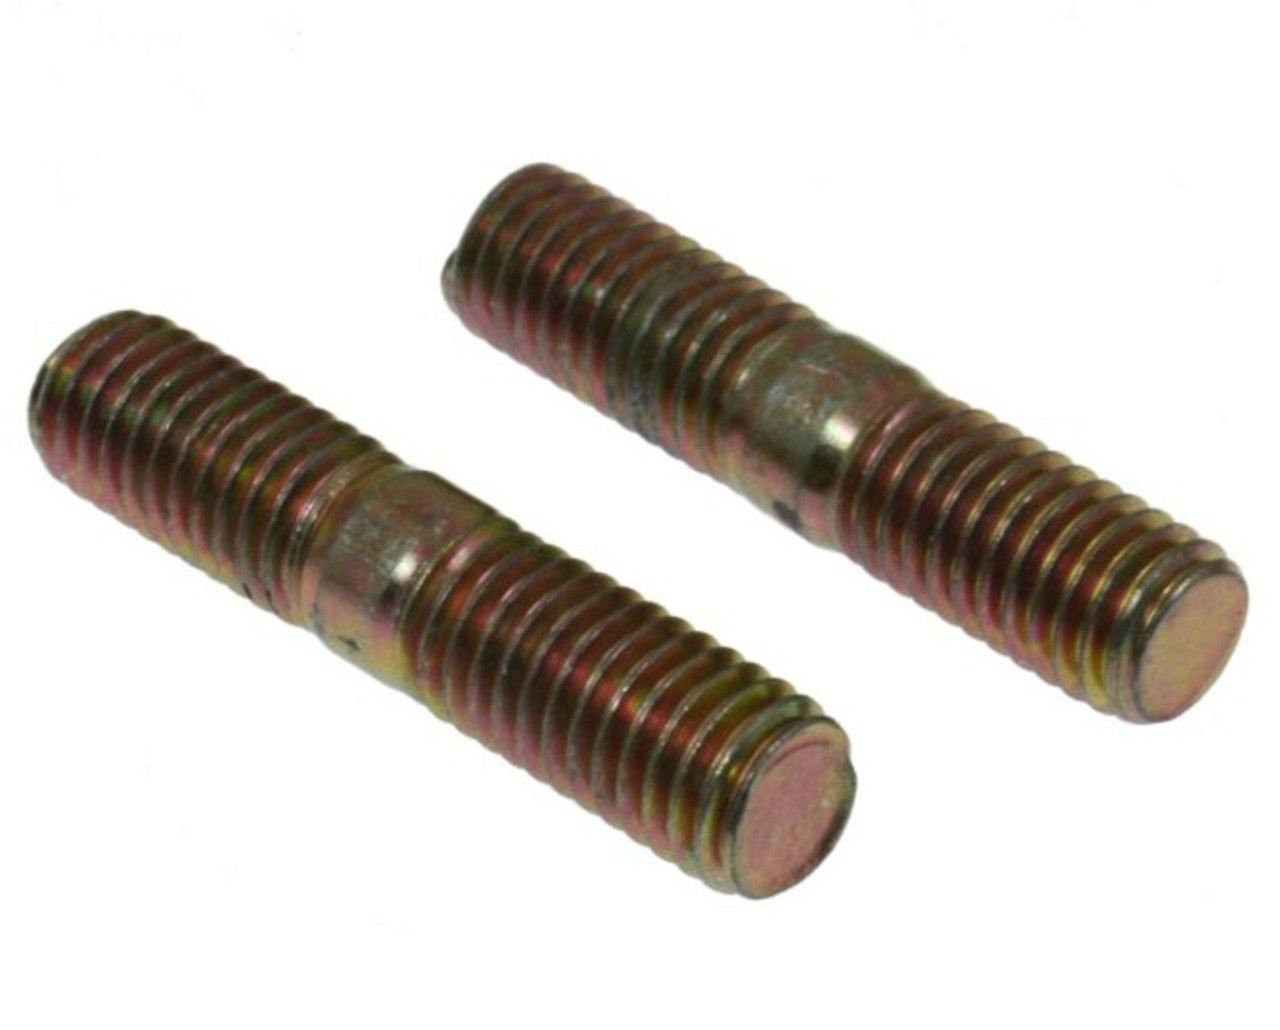 M8 x 37mm EXHAUST STUDS *2 PACK* FOR MOTORS WITH GY6 150cc OR QMB139 50cc MOTORS